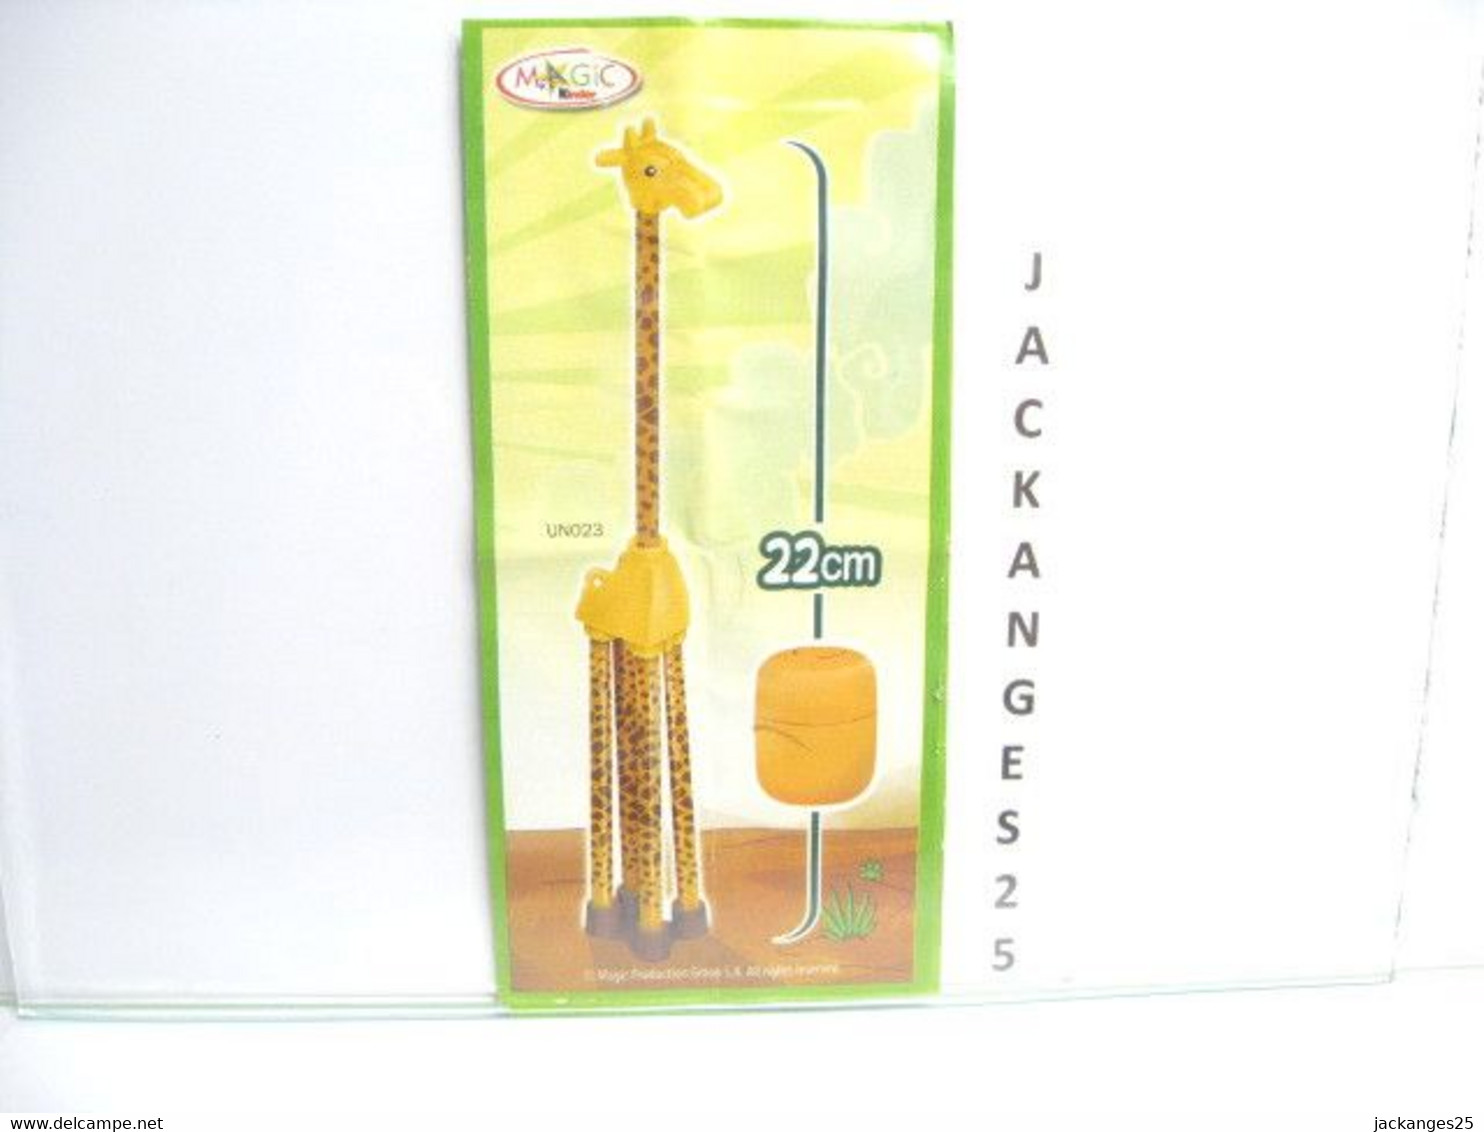 KINDER MPG UN 23 A GIRAFE  ANIMAUX NATURE NATOONS TIERE 2010  2011 + BPZ A - Familles